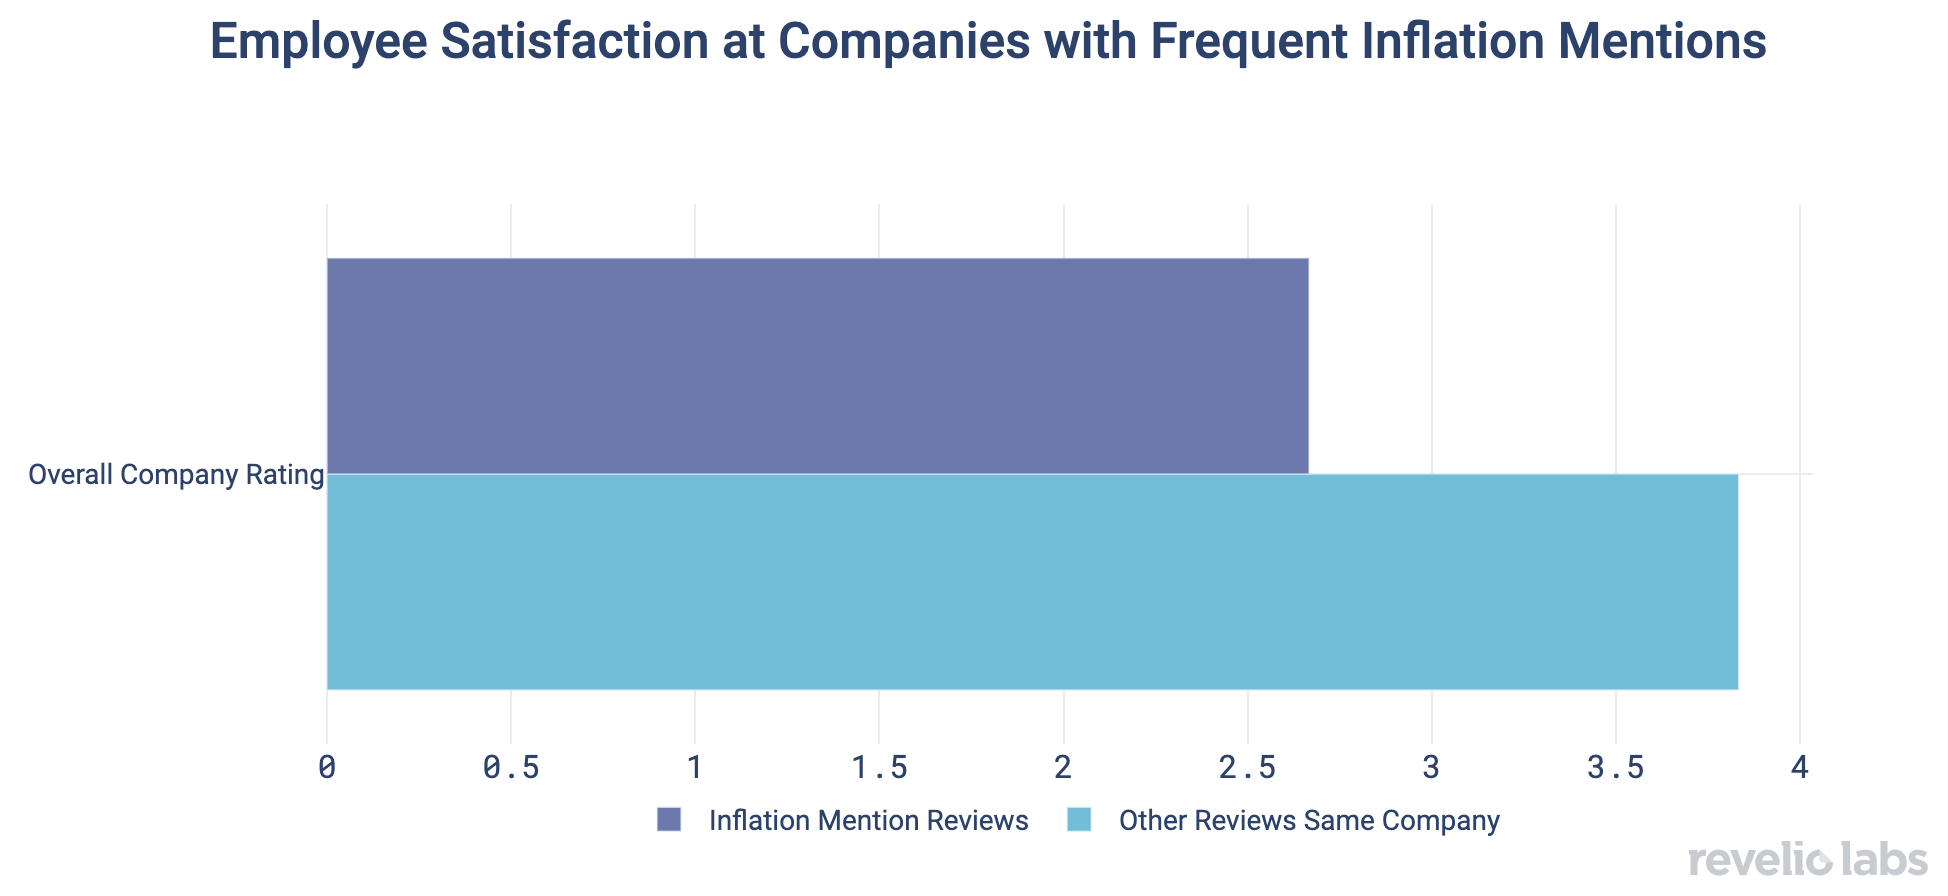 Employee Satisfaction at Companies with Frequent Inflation Mentions